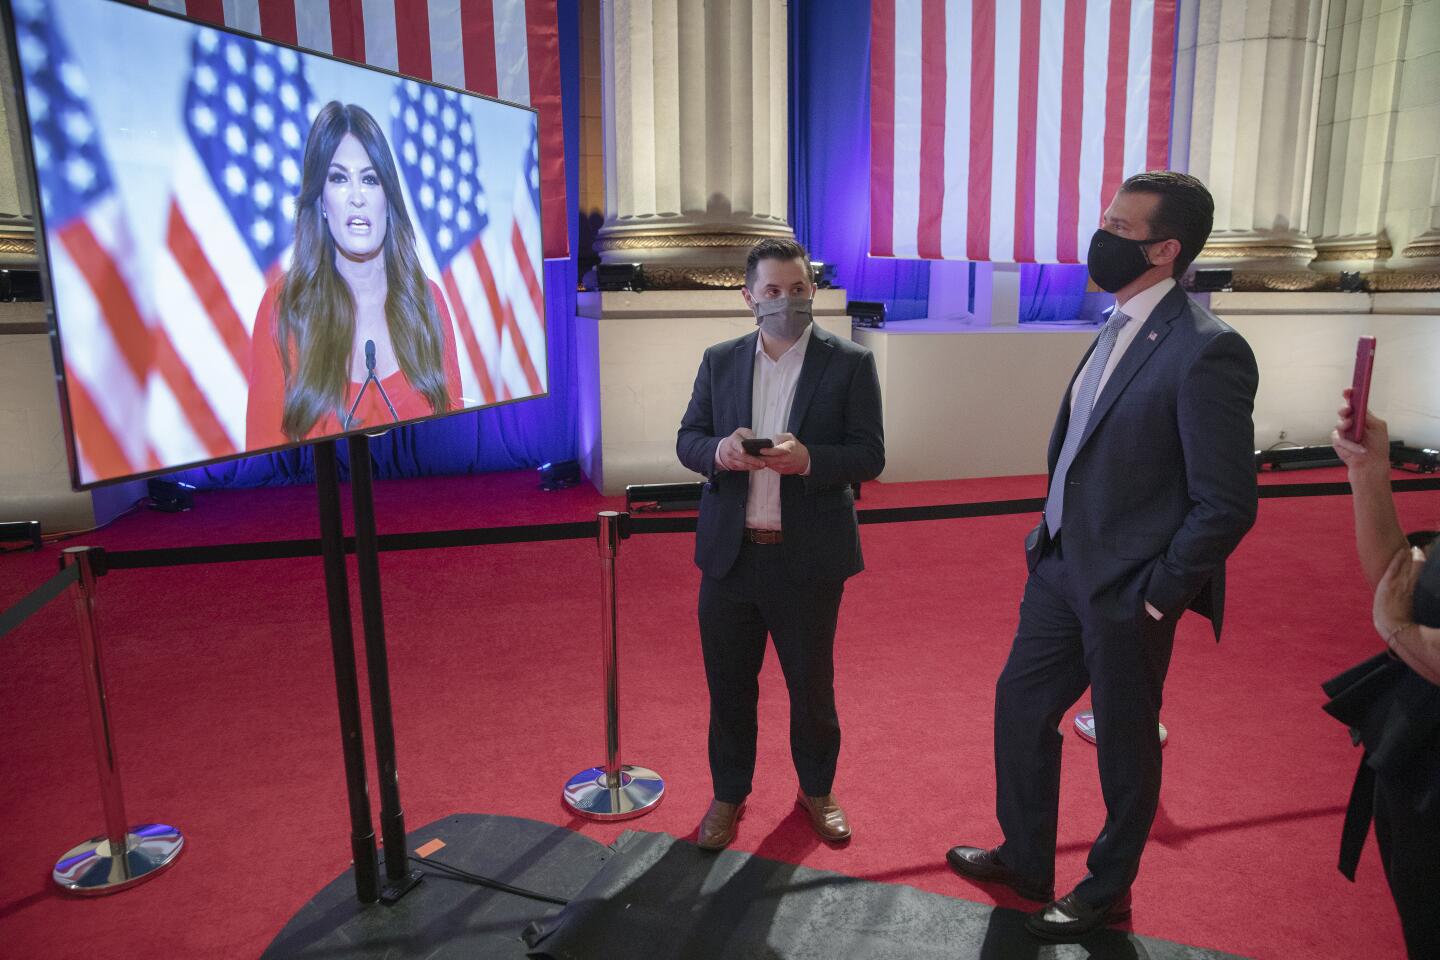 Donald Trump Jr., right, watches his girlfriend, Kimberly Guilfoyle, as she records her address to the convention.